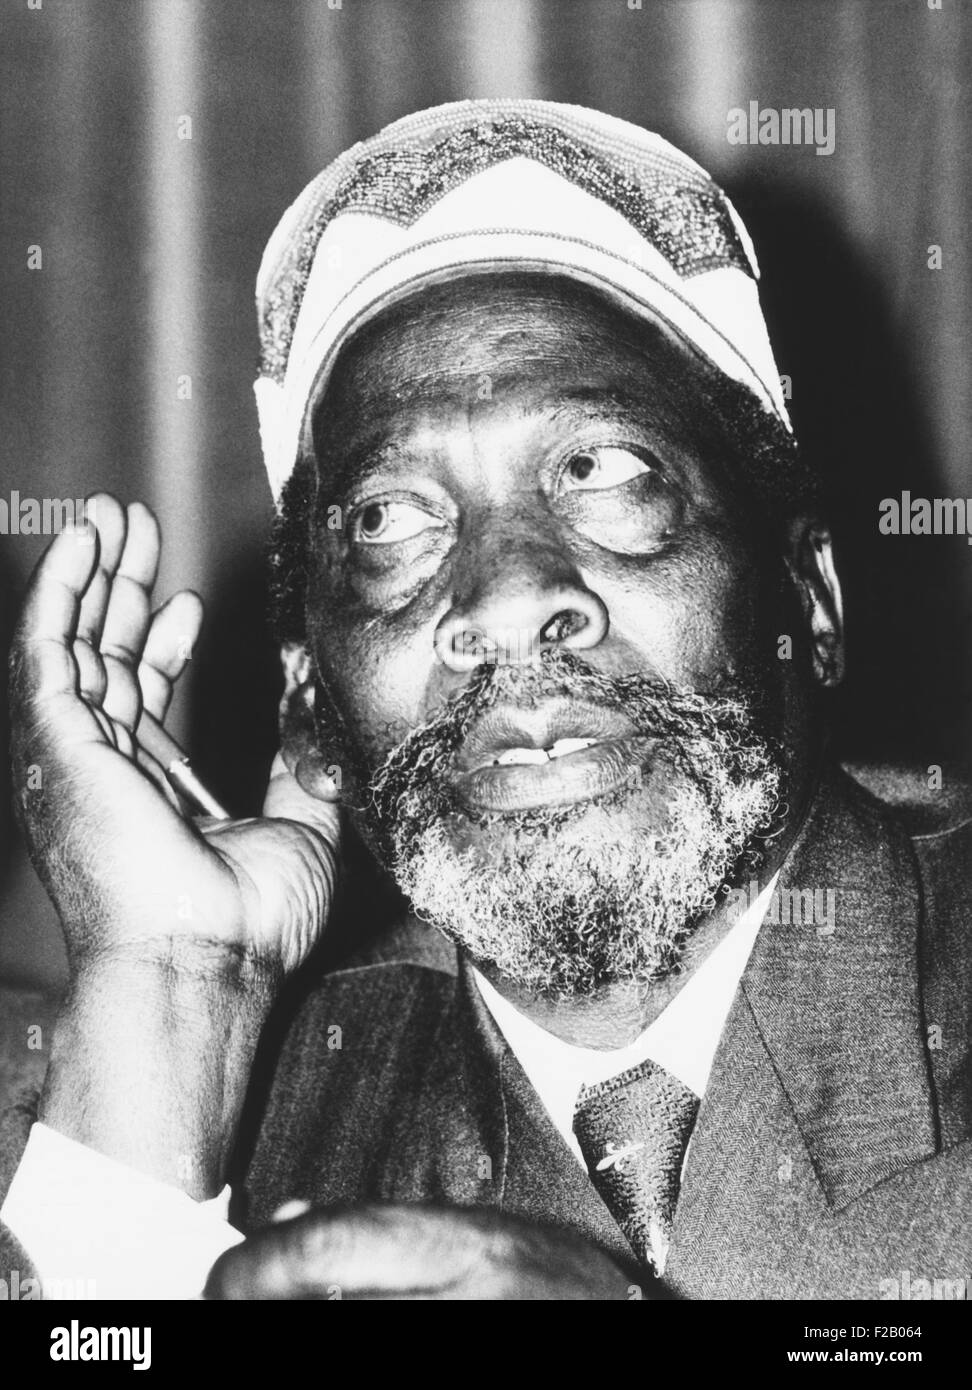 Jomo Kenyatta, Kenyan nationalist leader at a press conference in London, Nov. 8, 1961. In 1962 while still ruled by Britain, Kenya established internal government with Kenyatta as its first President. While Kenyatta was of the Kikuyu (Gikuyu) tribe, he wore a beaded Luo tribal hat. Originally worn by only by men of the Luo tribe, but after independence, it was adopted by other Kenyans. (CSU 2015 9 684) Stock Photo